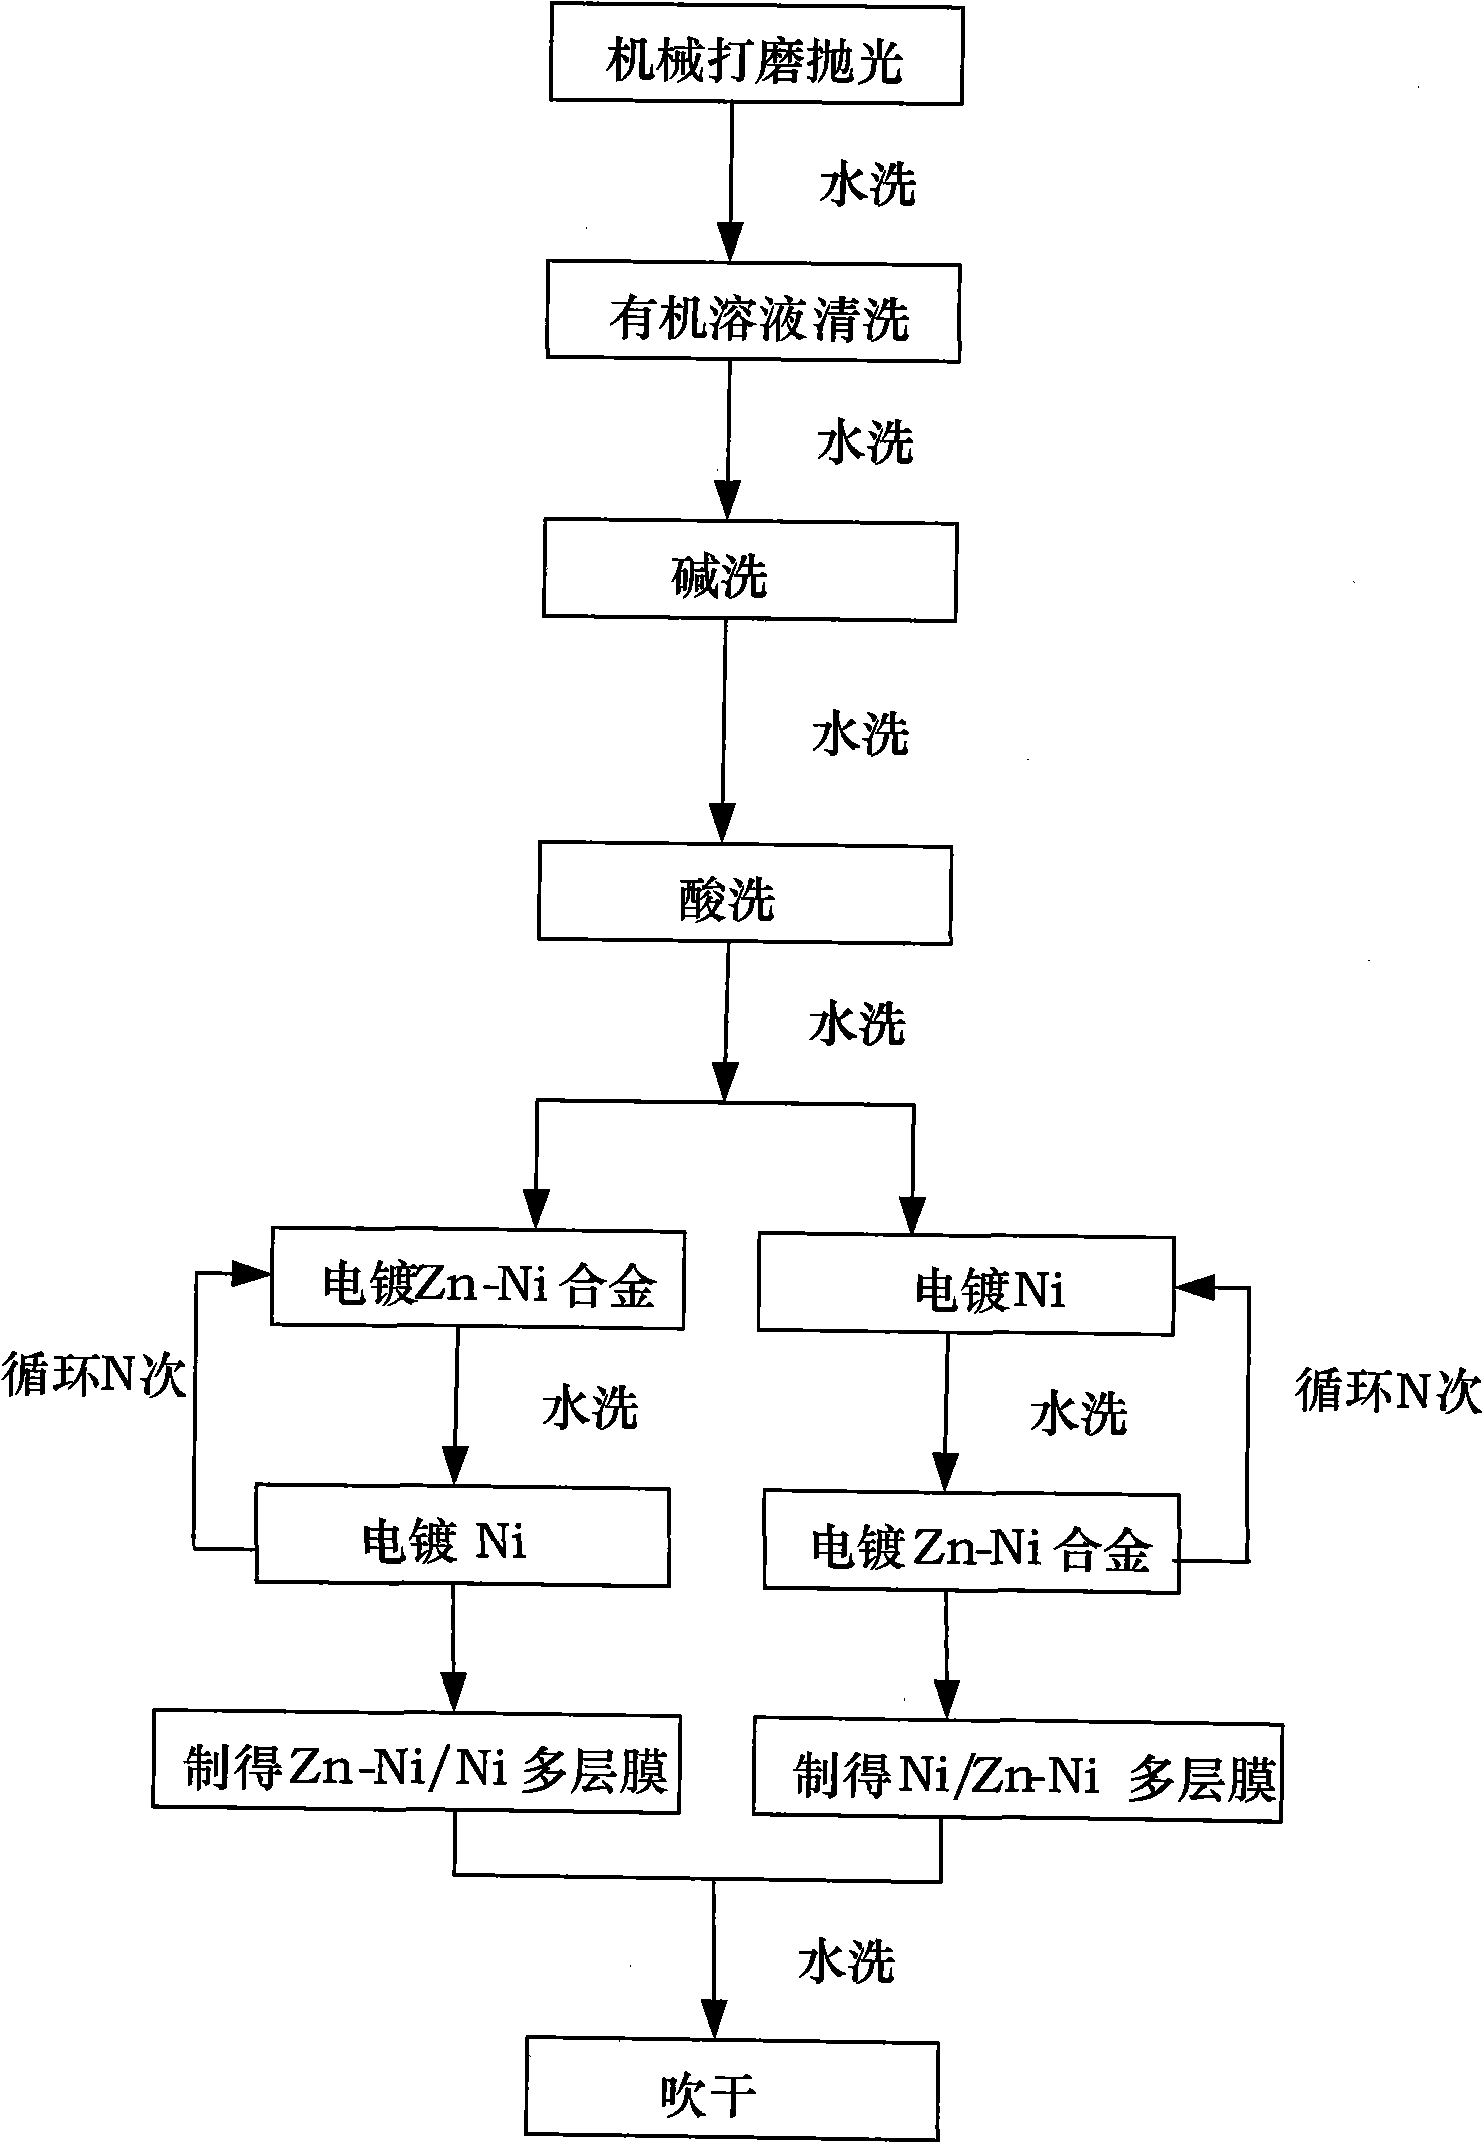 Method for modulating zinc-nickel alloy and nickel combined multi-layer membranous by electrochemical deposition component